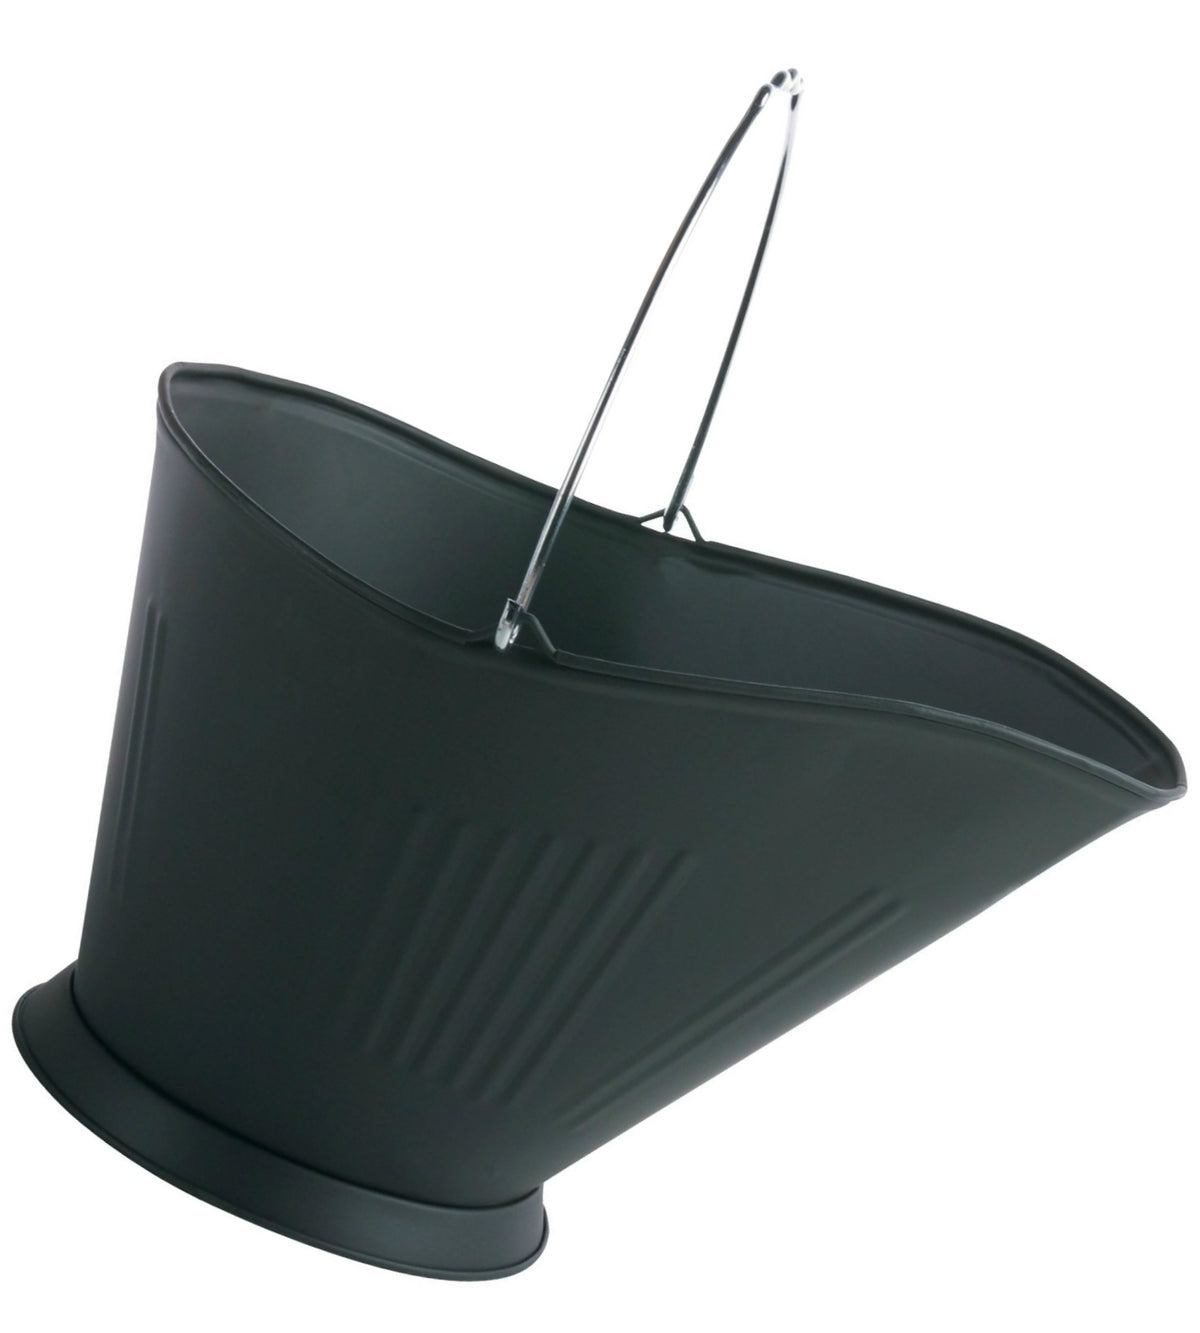 buy ash buckets, fireplace & stove accessories at cheap rate in bulk. wholesale & retail fireplace goods & supplies store.